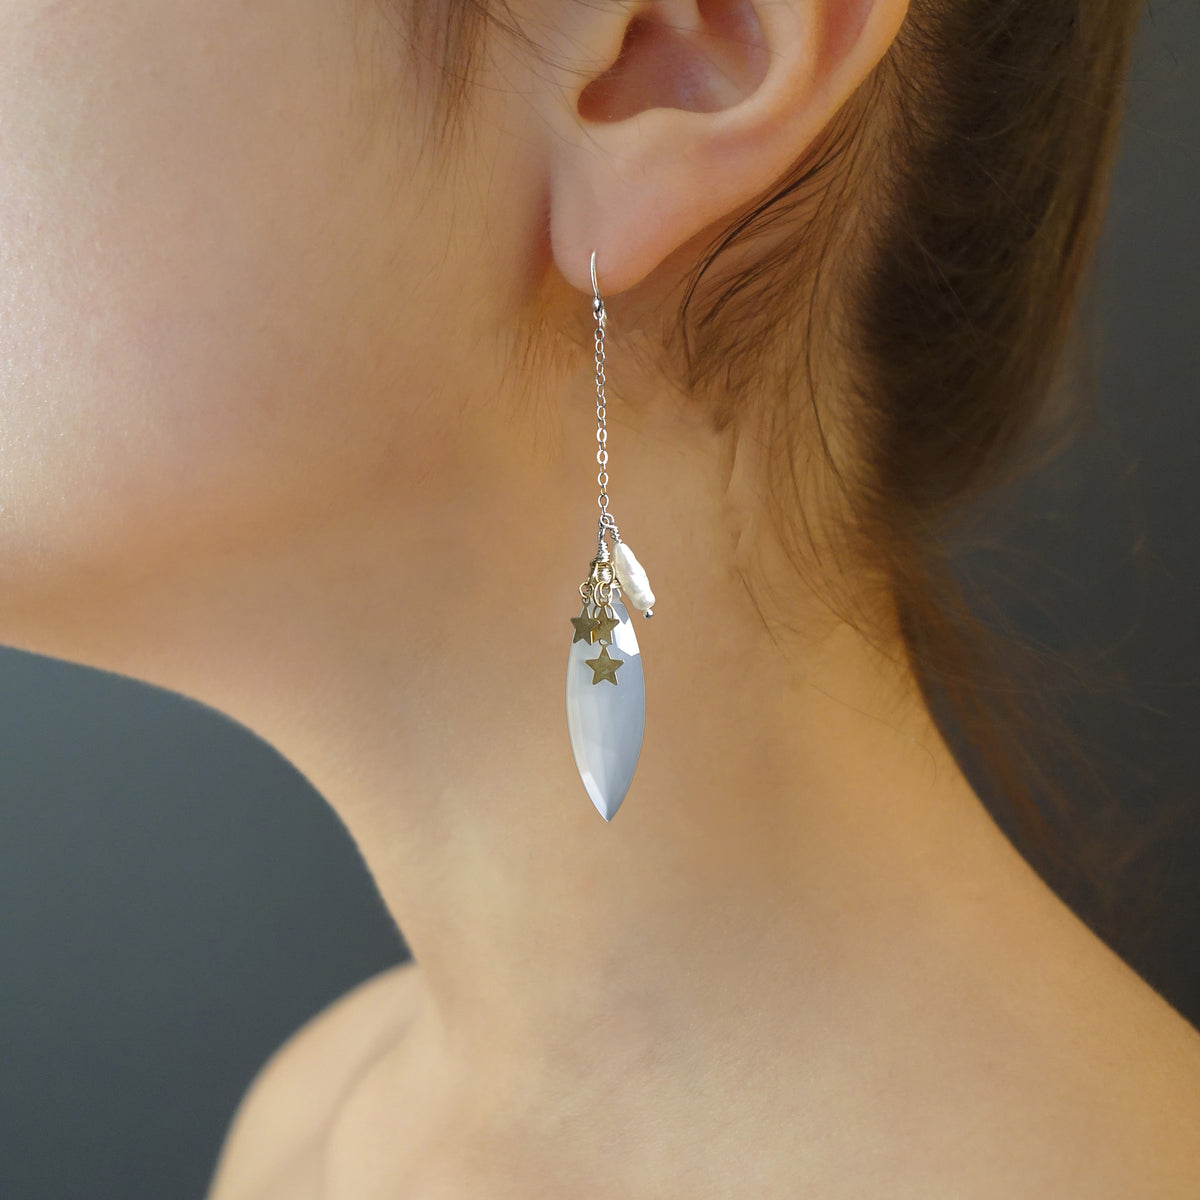 You Must be my Lucky Star: moonstone and pearl earring